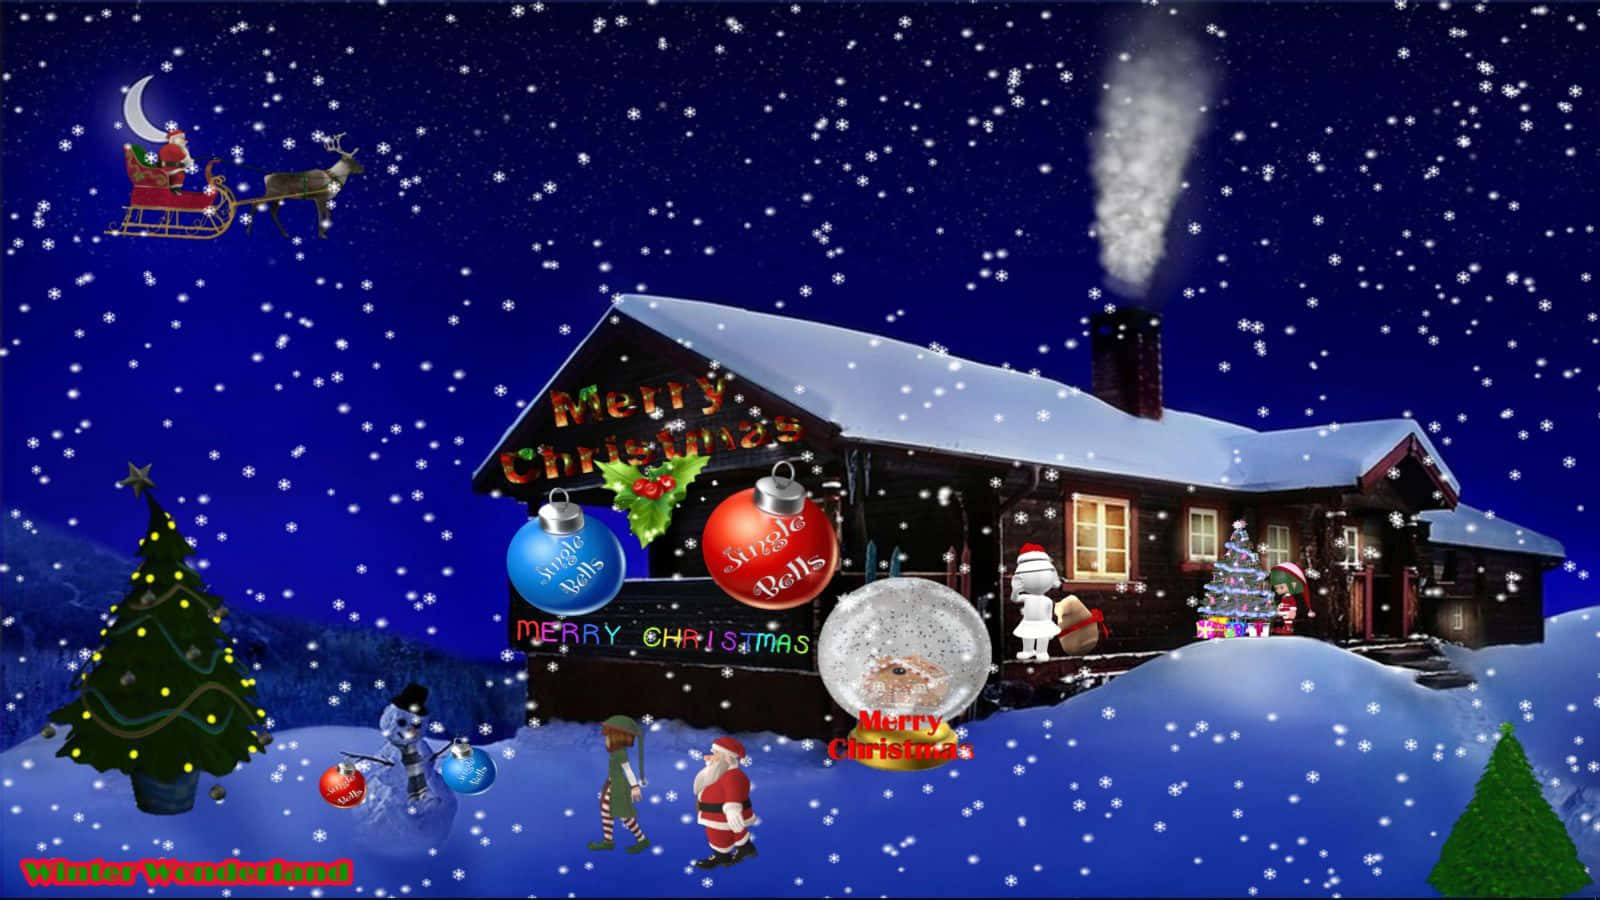 Let the magic of Christmas fill you with a Winter Wonderland! Wallpaper